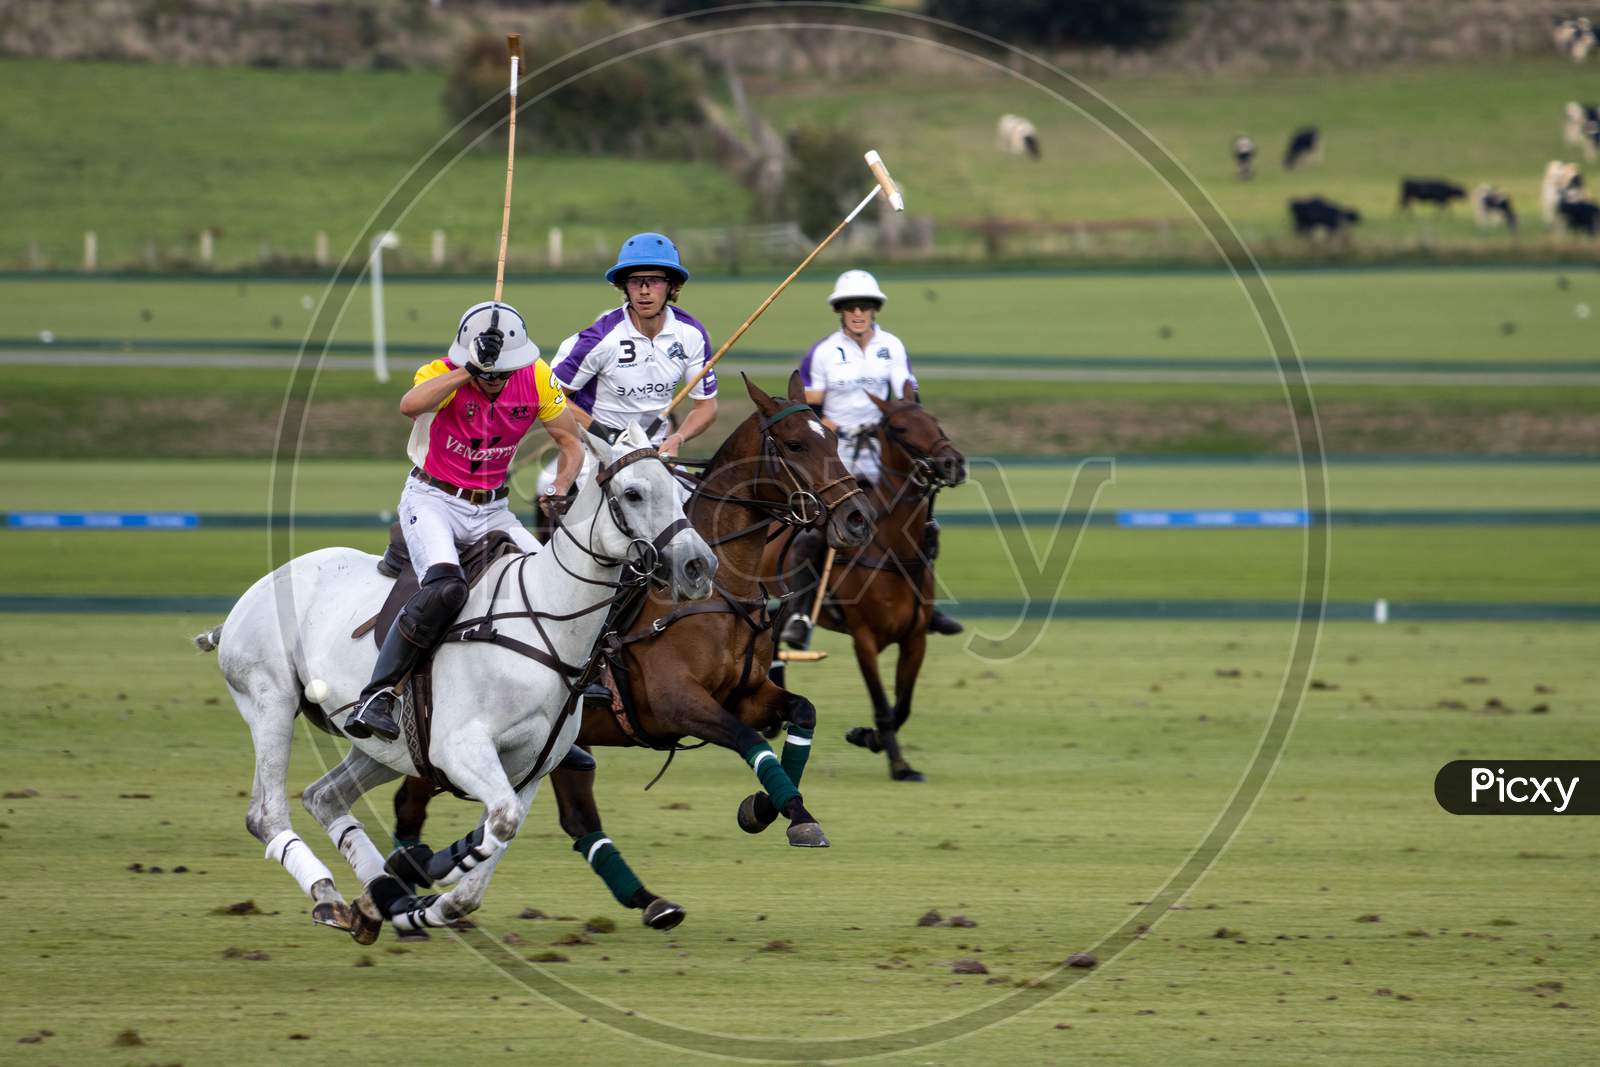 Midhurst, West Sussex/Uk - September 1 : Playing Polo In Midhurst, West Sussex On September 1, 2020.  Three Unidentified People